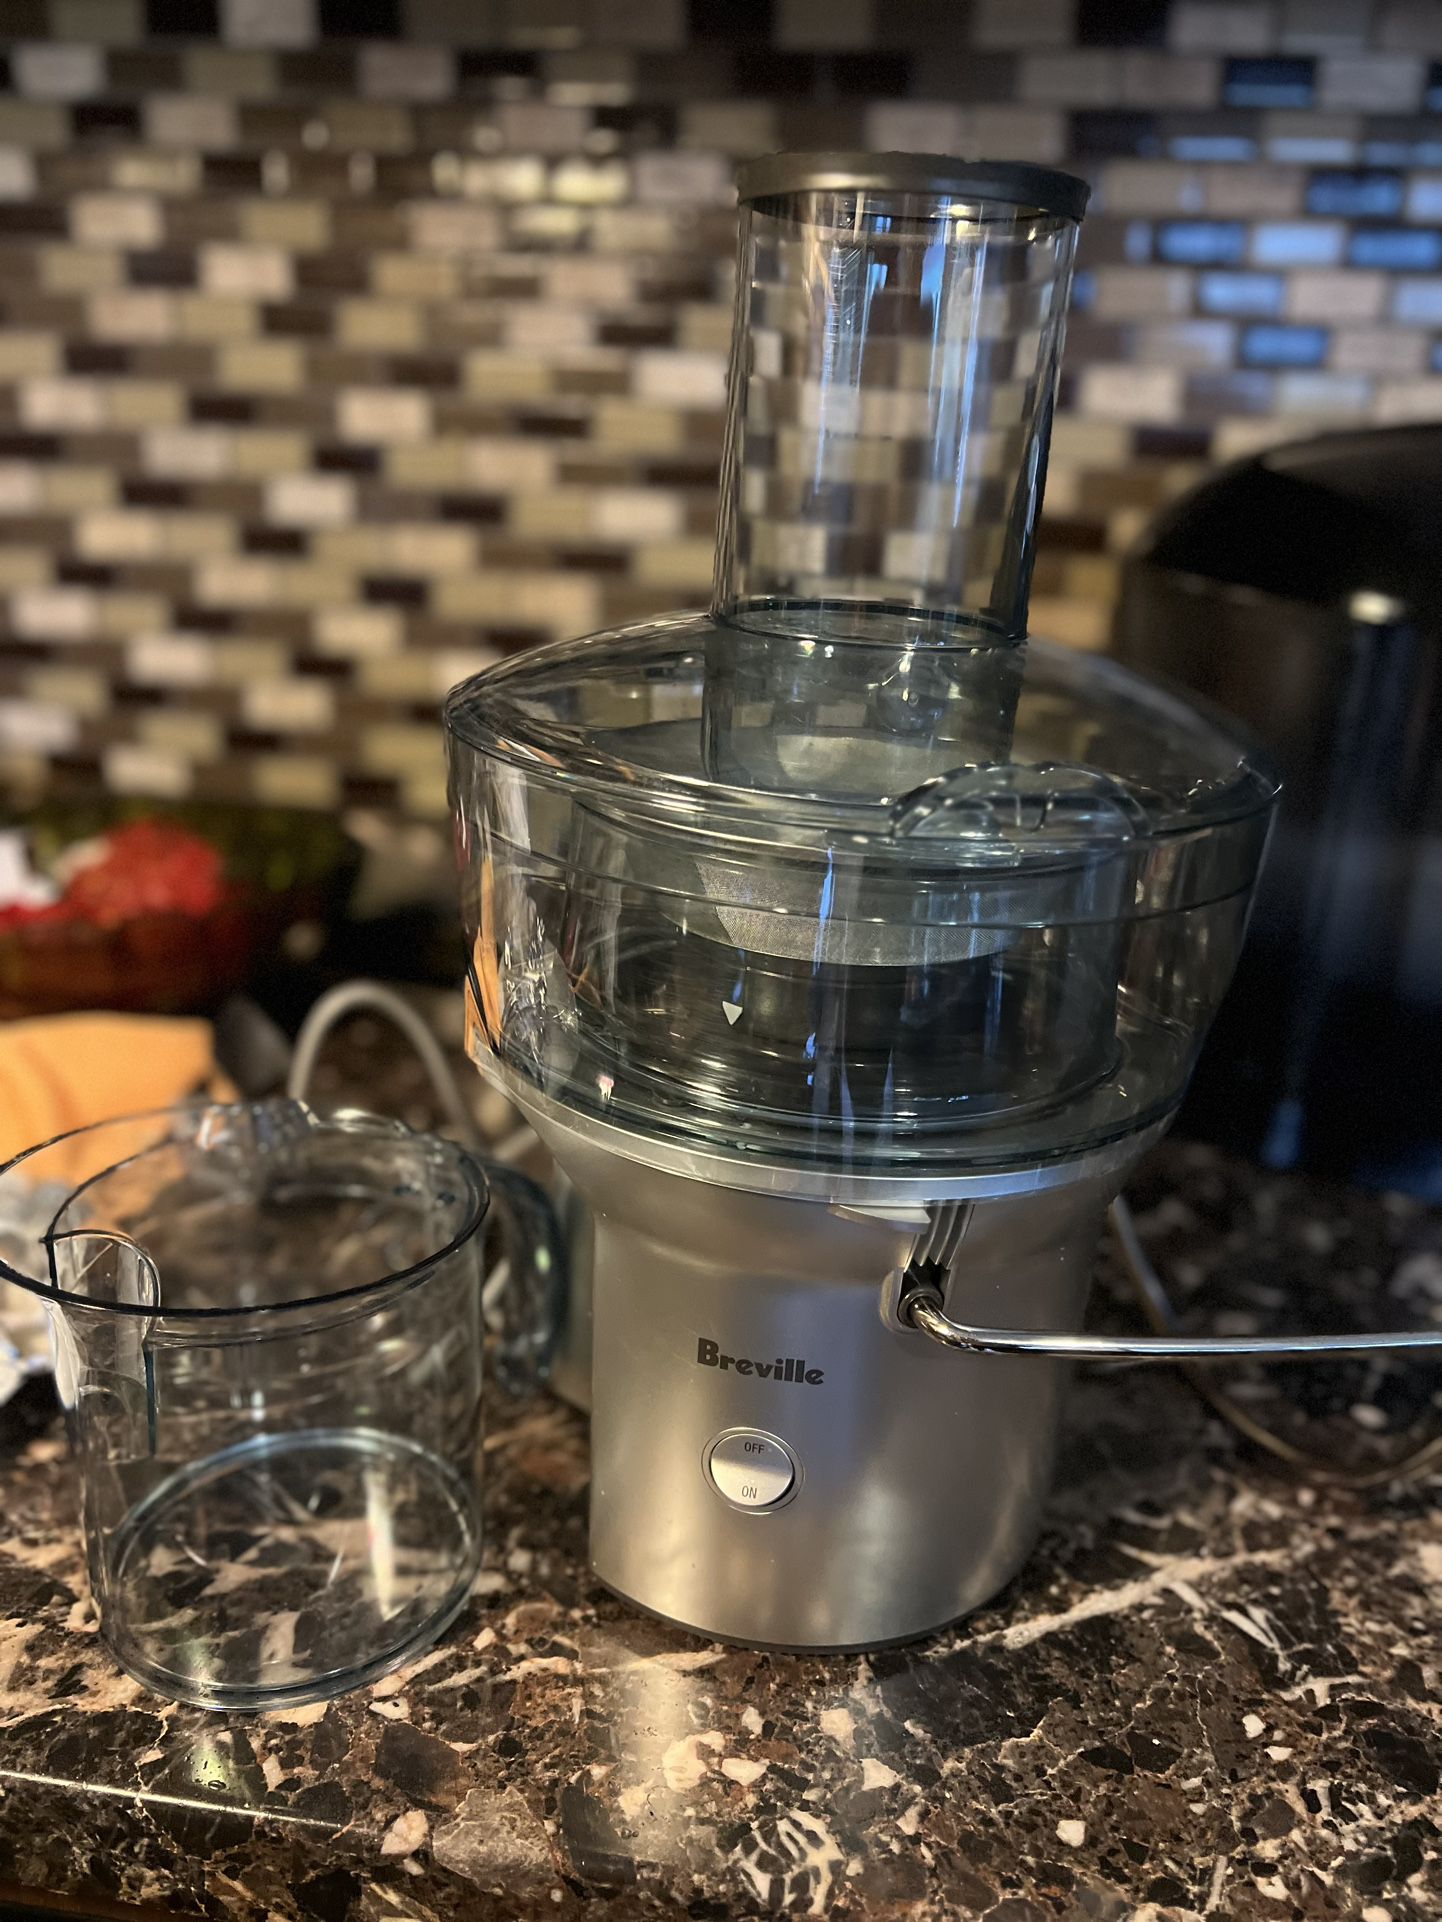 Used One Time Only! Breville Juice Fountain Compact